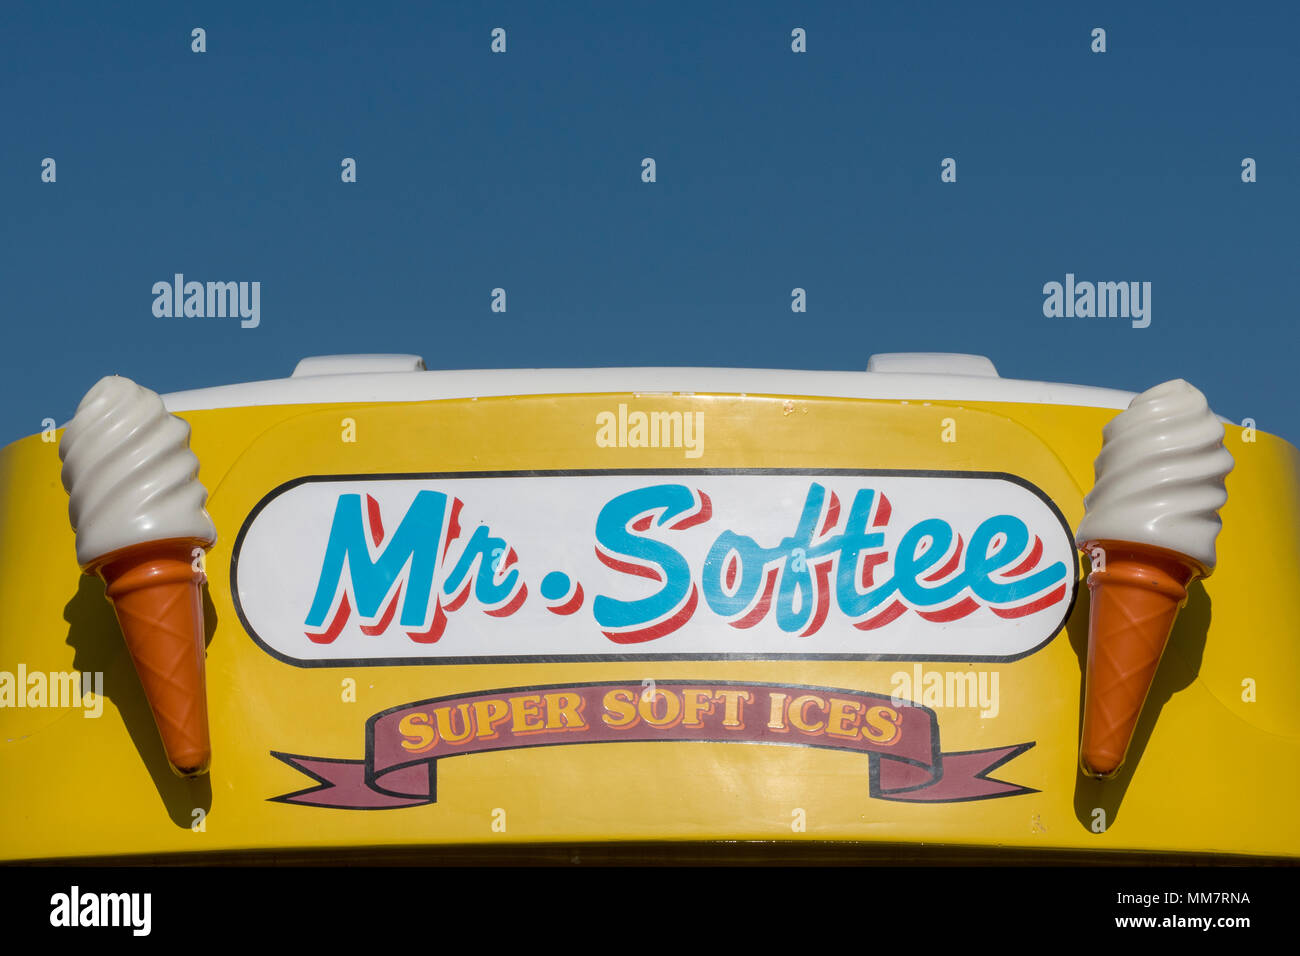 the logo or sign on the top of an ice cream van with mr softee or softie written on the illuminated pnel on front. name badge on ice cream van seaside Stock Photo